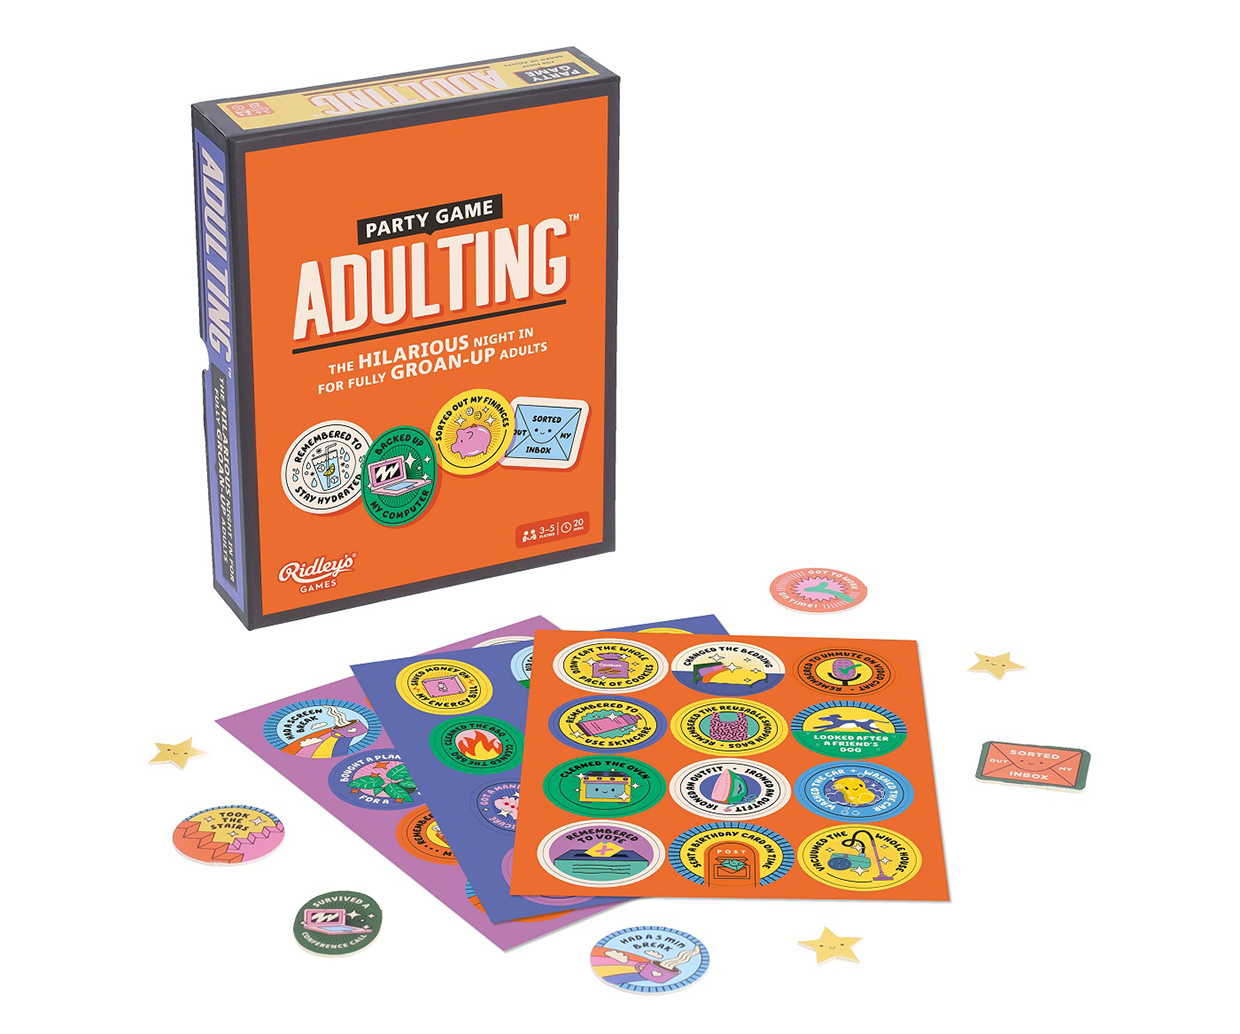 Adulting Party Game